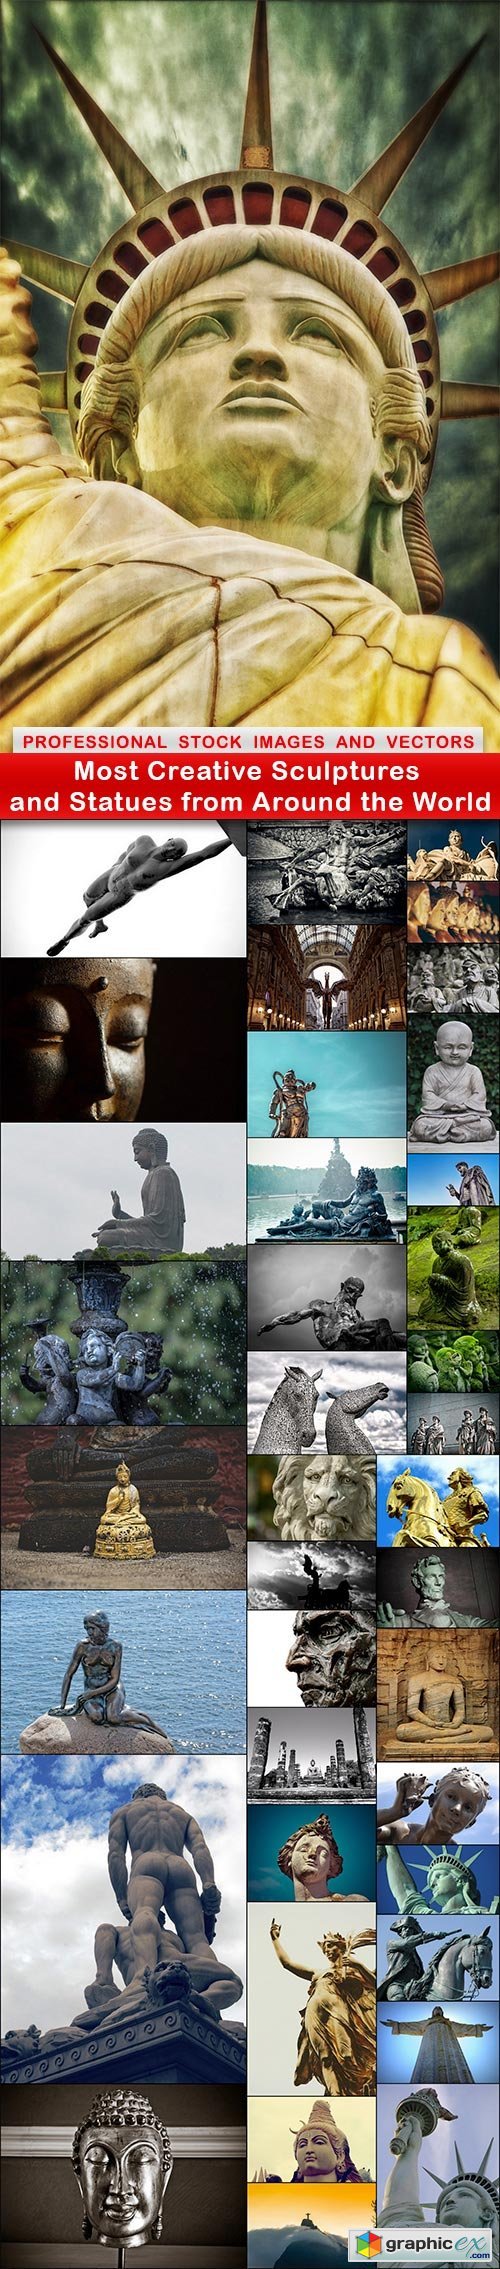 Most Creative Sculptures and Statues from Around the World - 39 UHQ JPEG